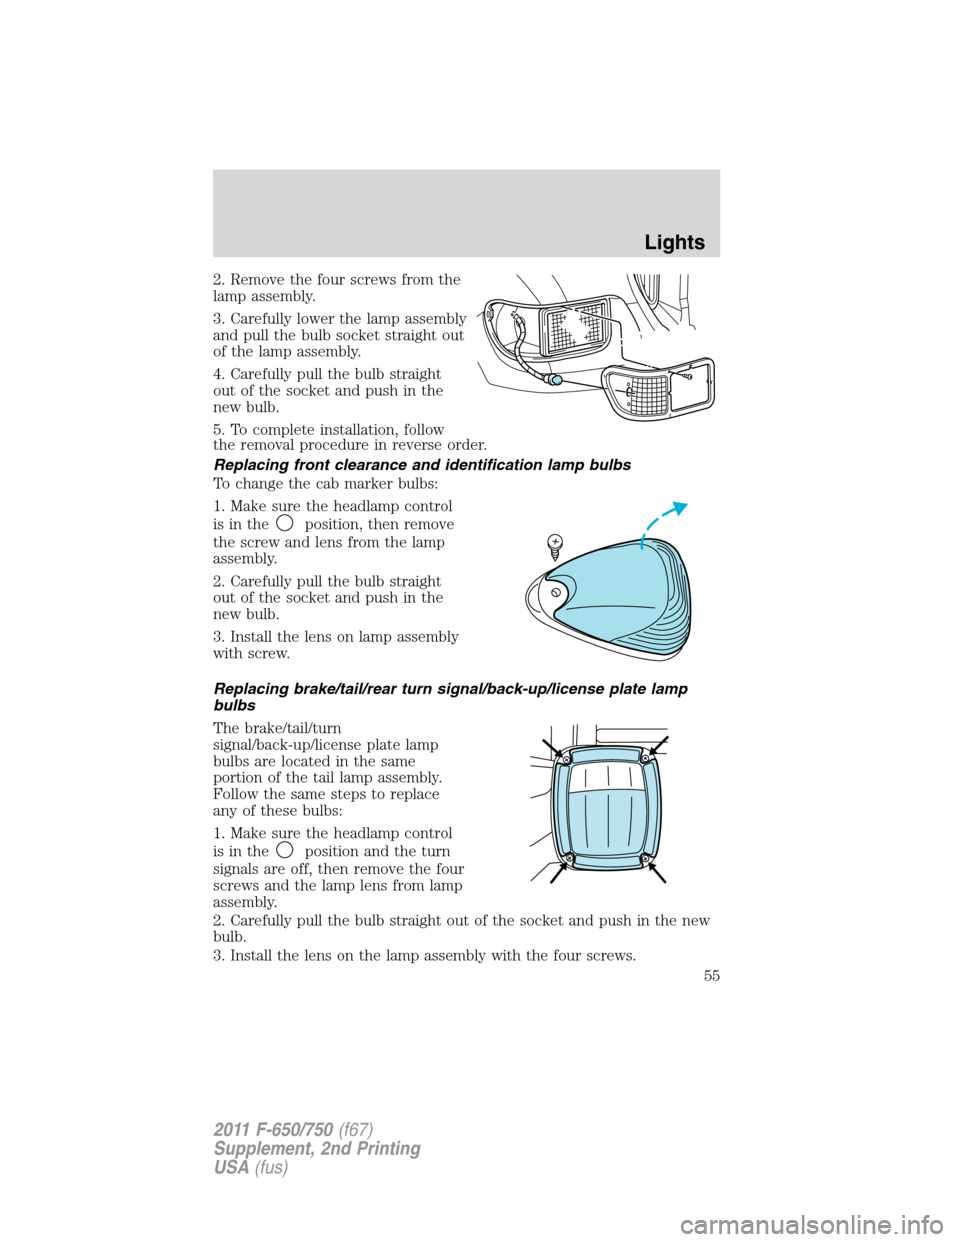 FORD F650 2011 12.G Owners Manual 2. Remove the four screws from the
lamp assembly.
3. Carefully lower the lamp assembly
and pull the bulb socket straight out
of the lamp assembly.
4. Carefully pull the bulb straight
out of the socket